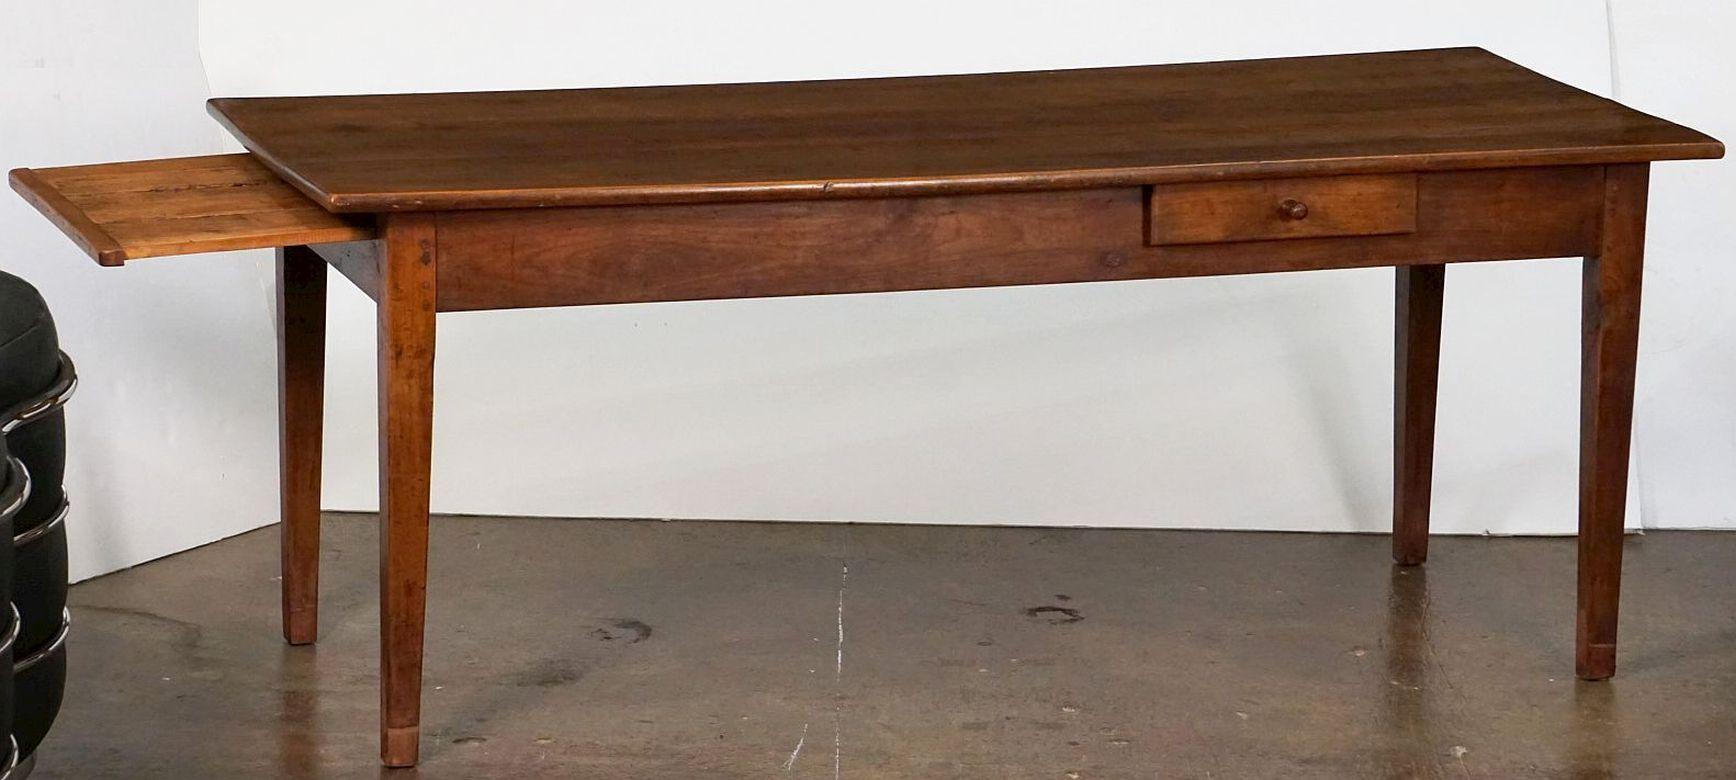 19th Century Large French Farm Table of Cherry with Drawer and Pull-Out Bread Board For Sale